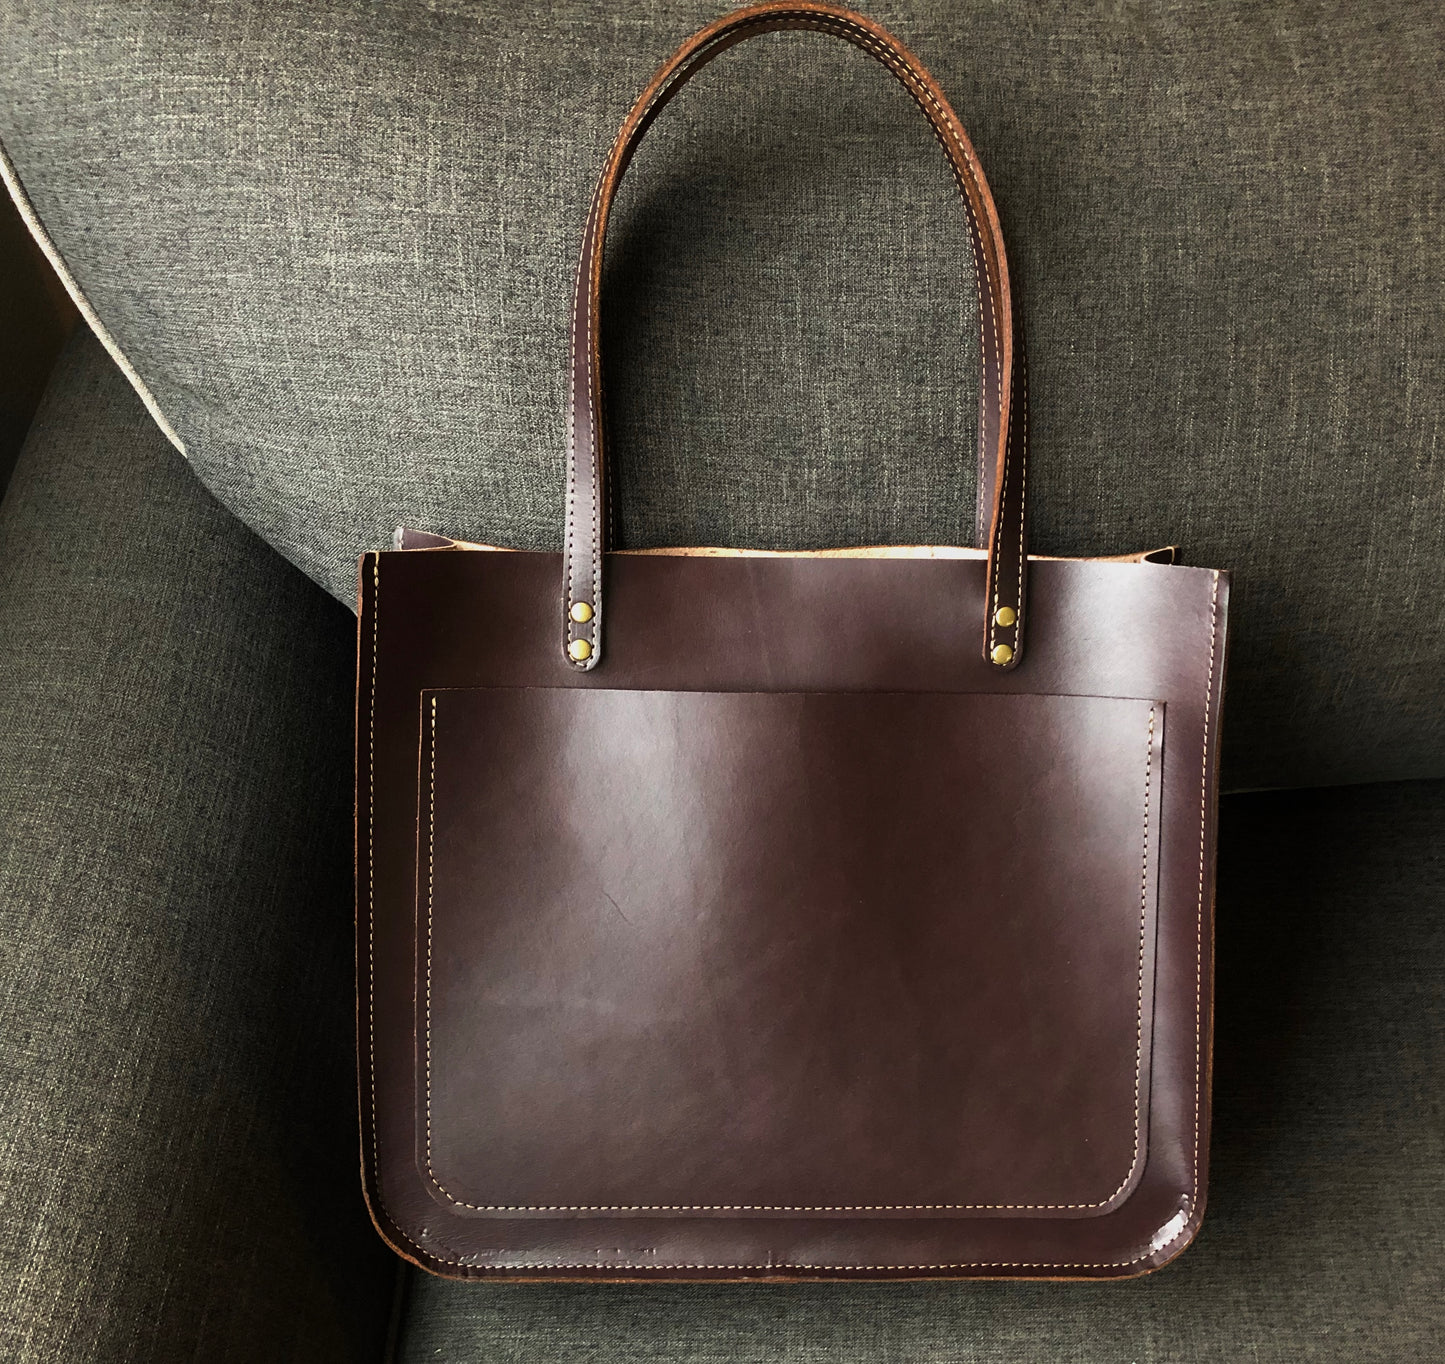 Rich brown leather tote bag sits on couch.